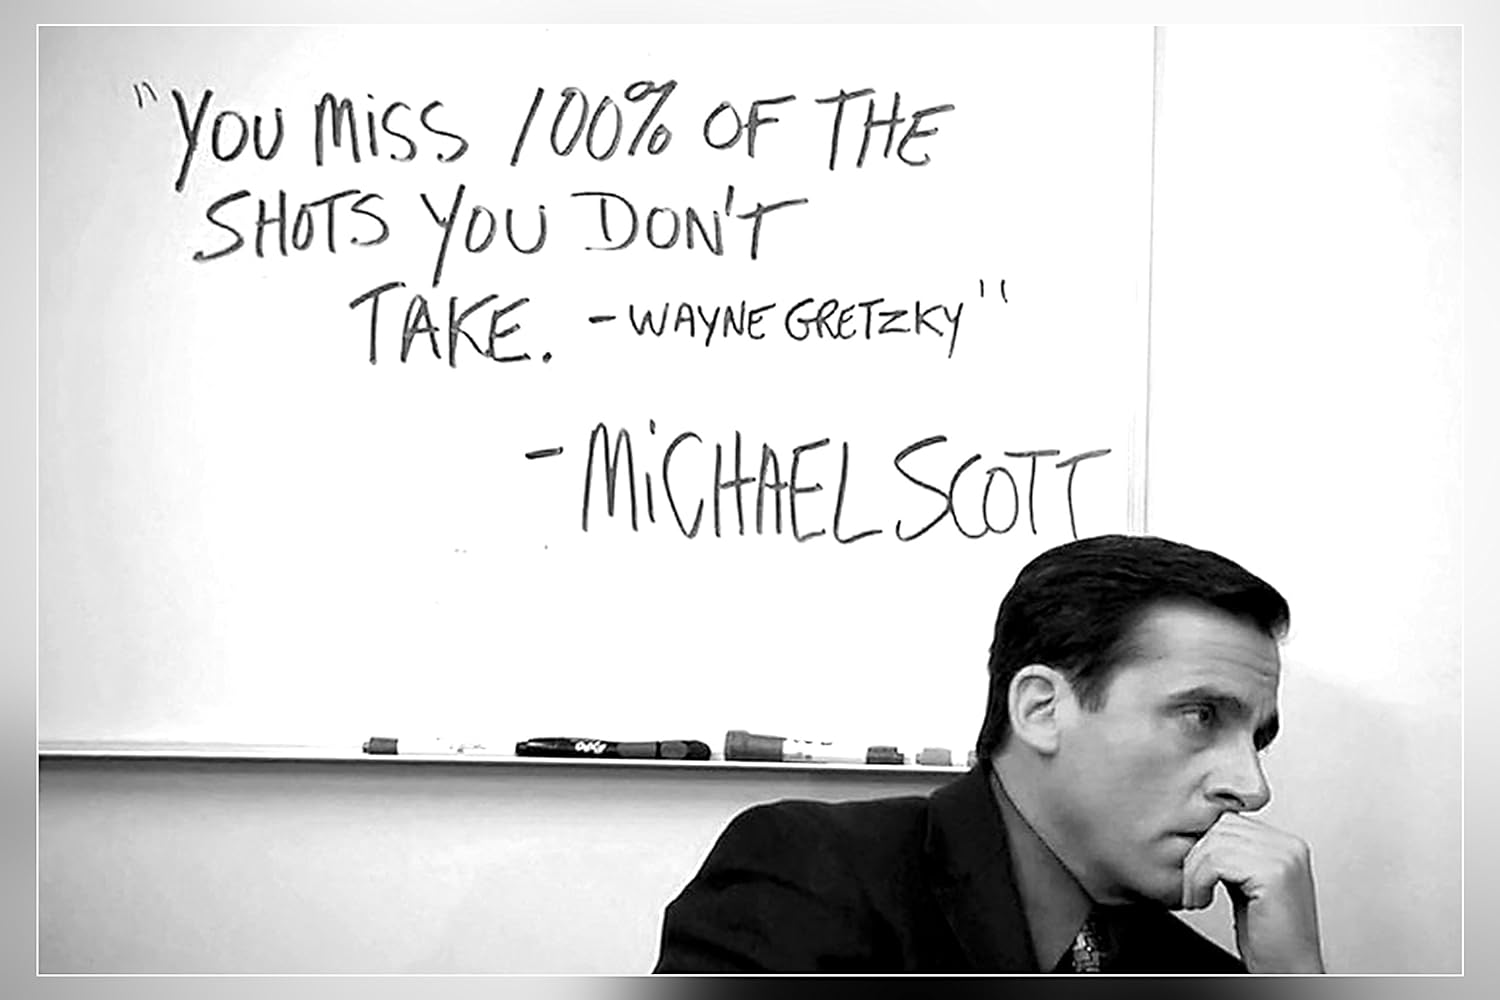 Amazon.com: Michael Scott's Motivational Quote.You Miss 100% of the Shots…  Poster Print 12X18 inch (Rolled): Posters & Prints